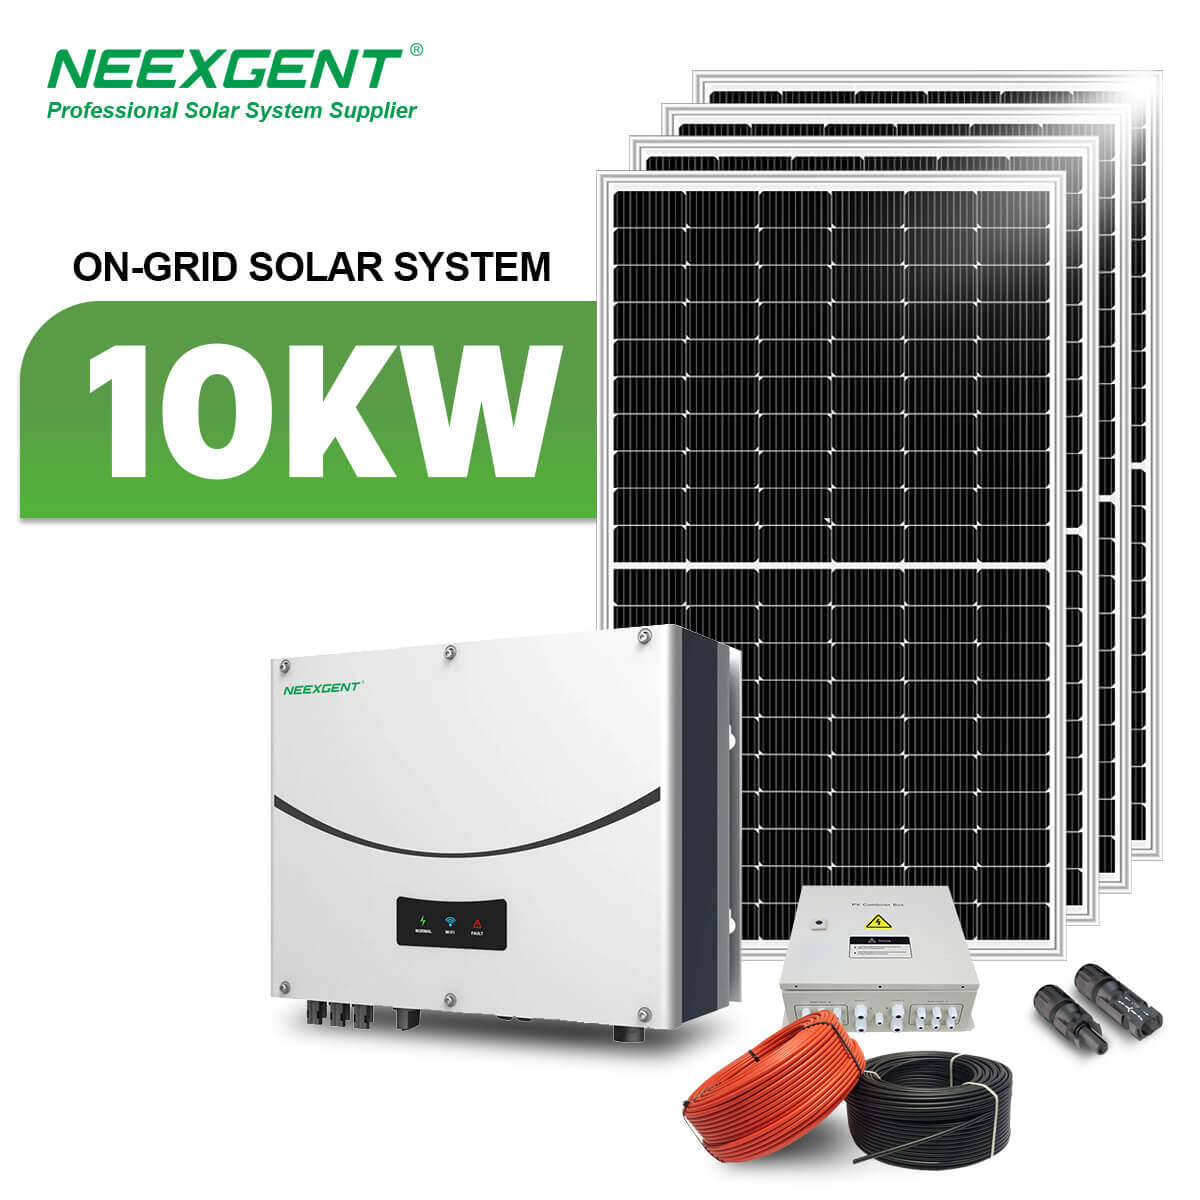 Neexgent Complete Set Solar Panel Power System 10kw Solar Energy Residential On-grid Solar System